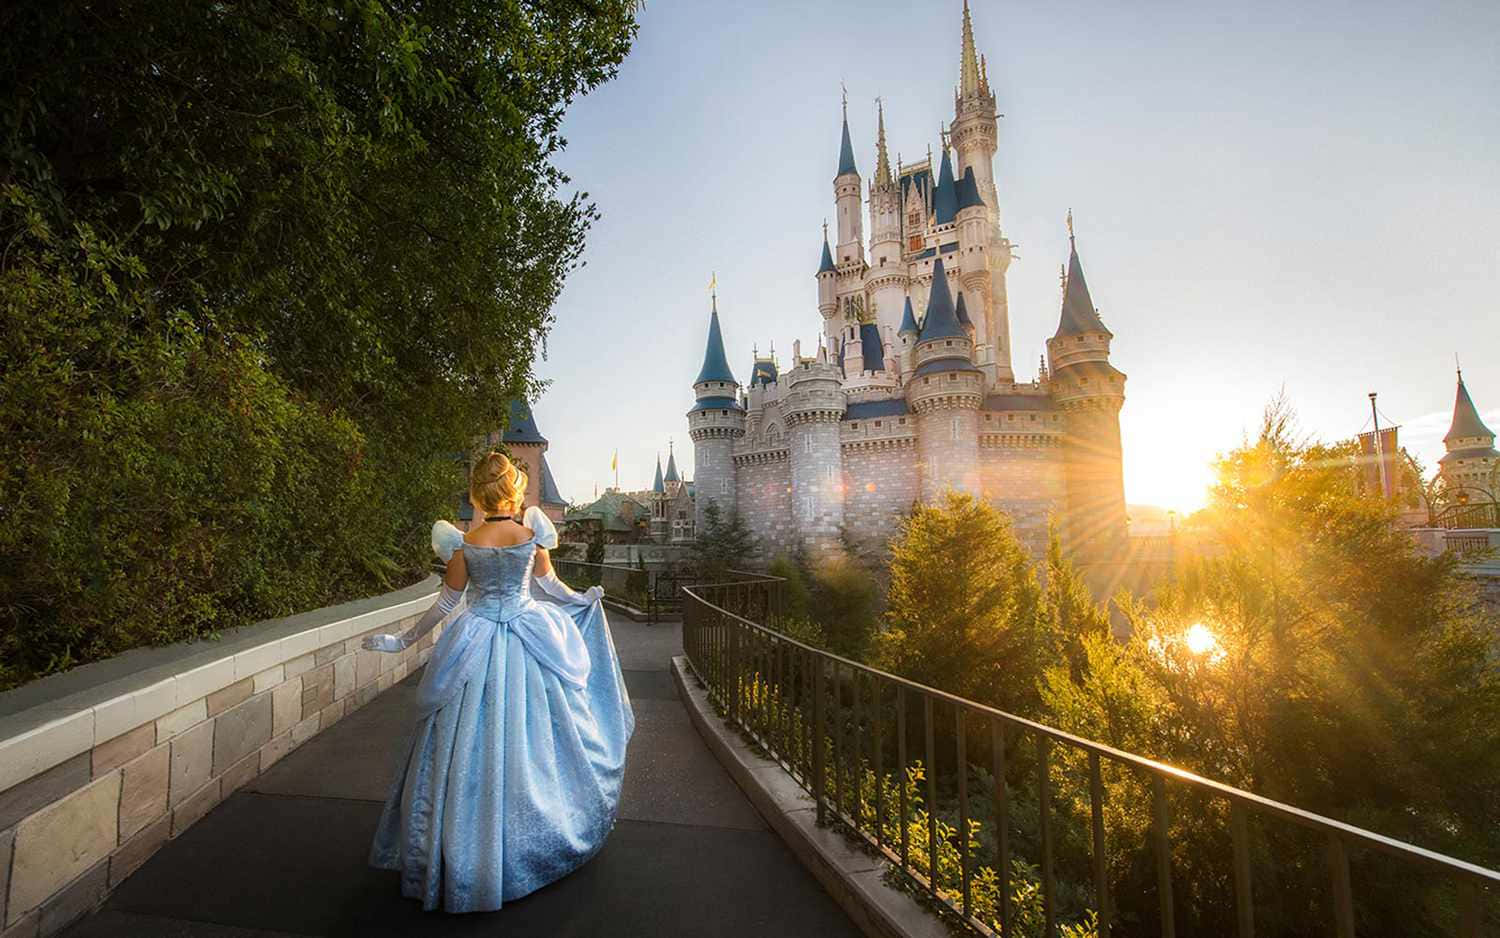 Cinderella’s long-awaited moment of triumph